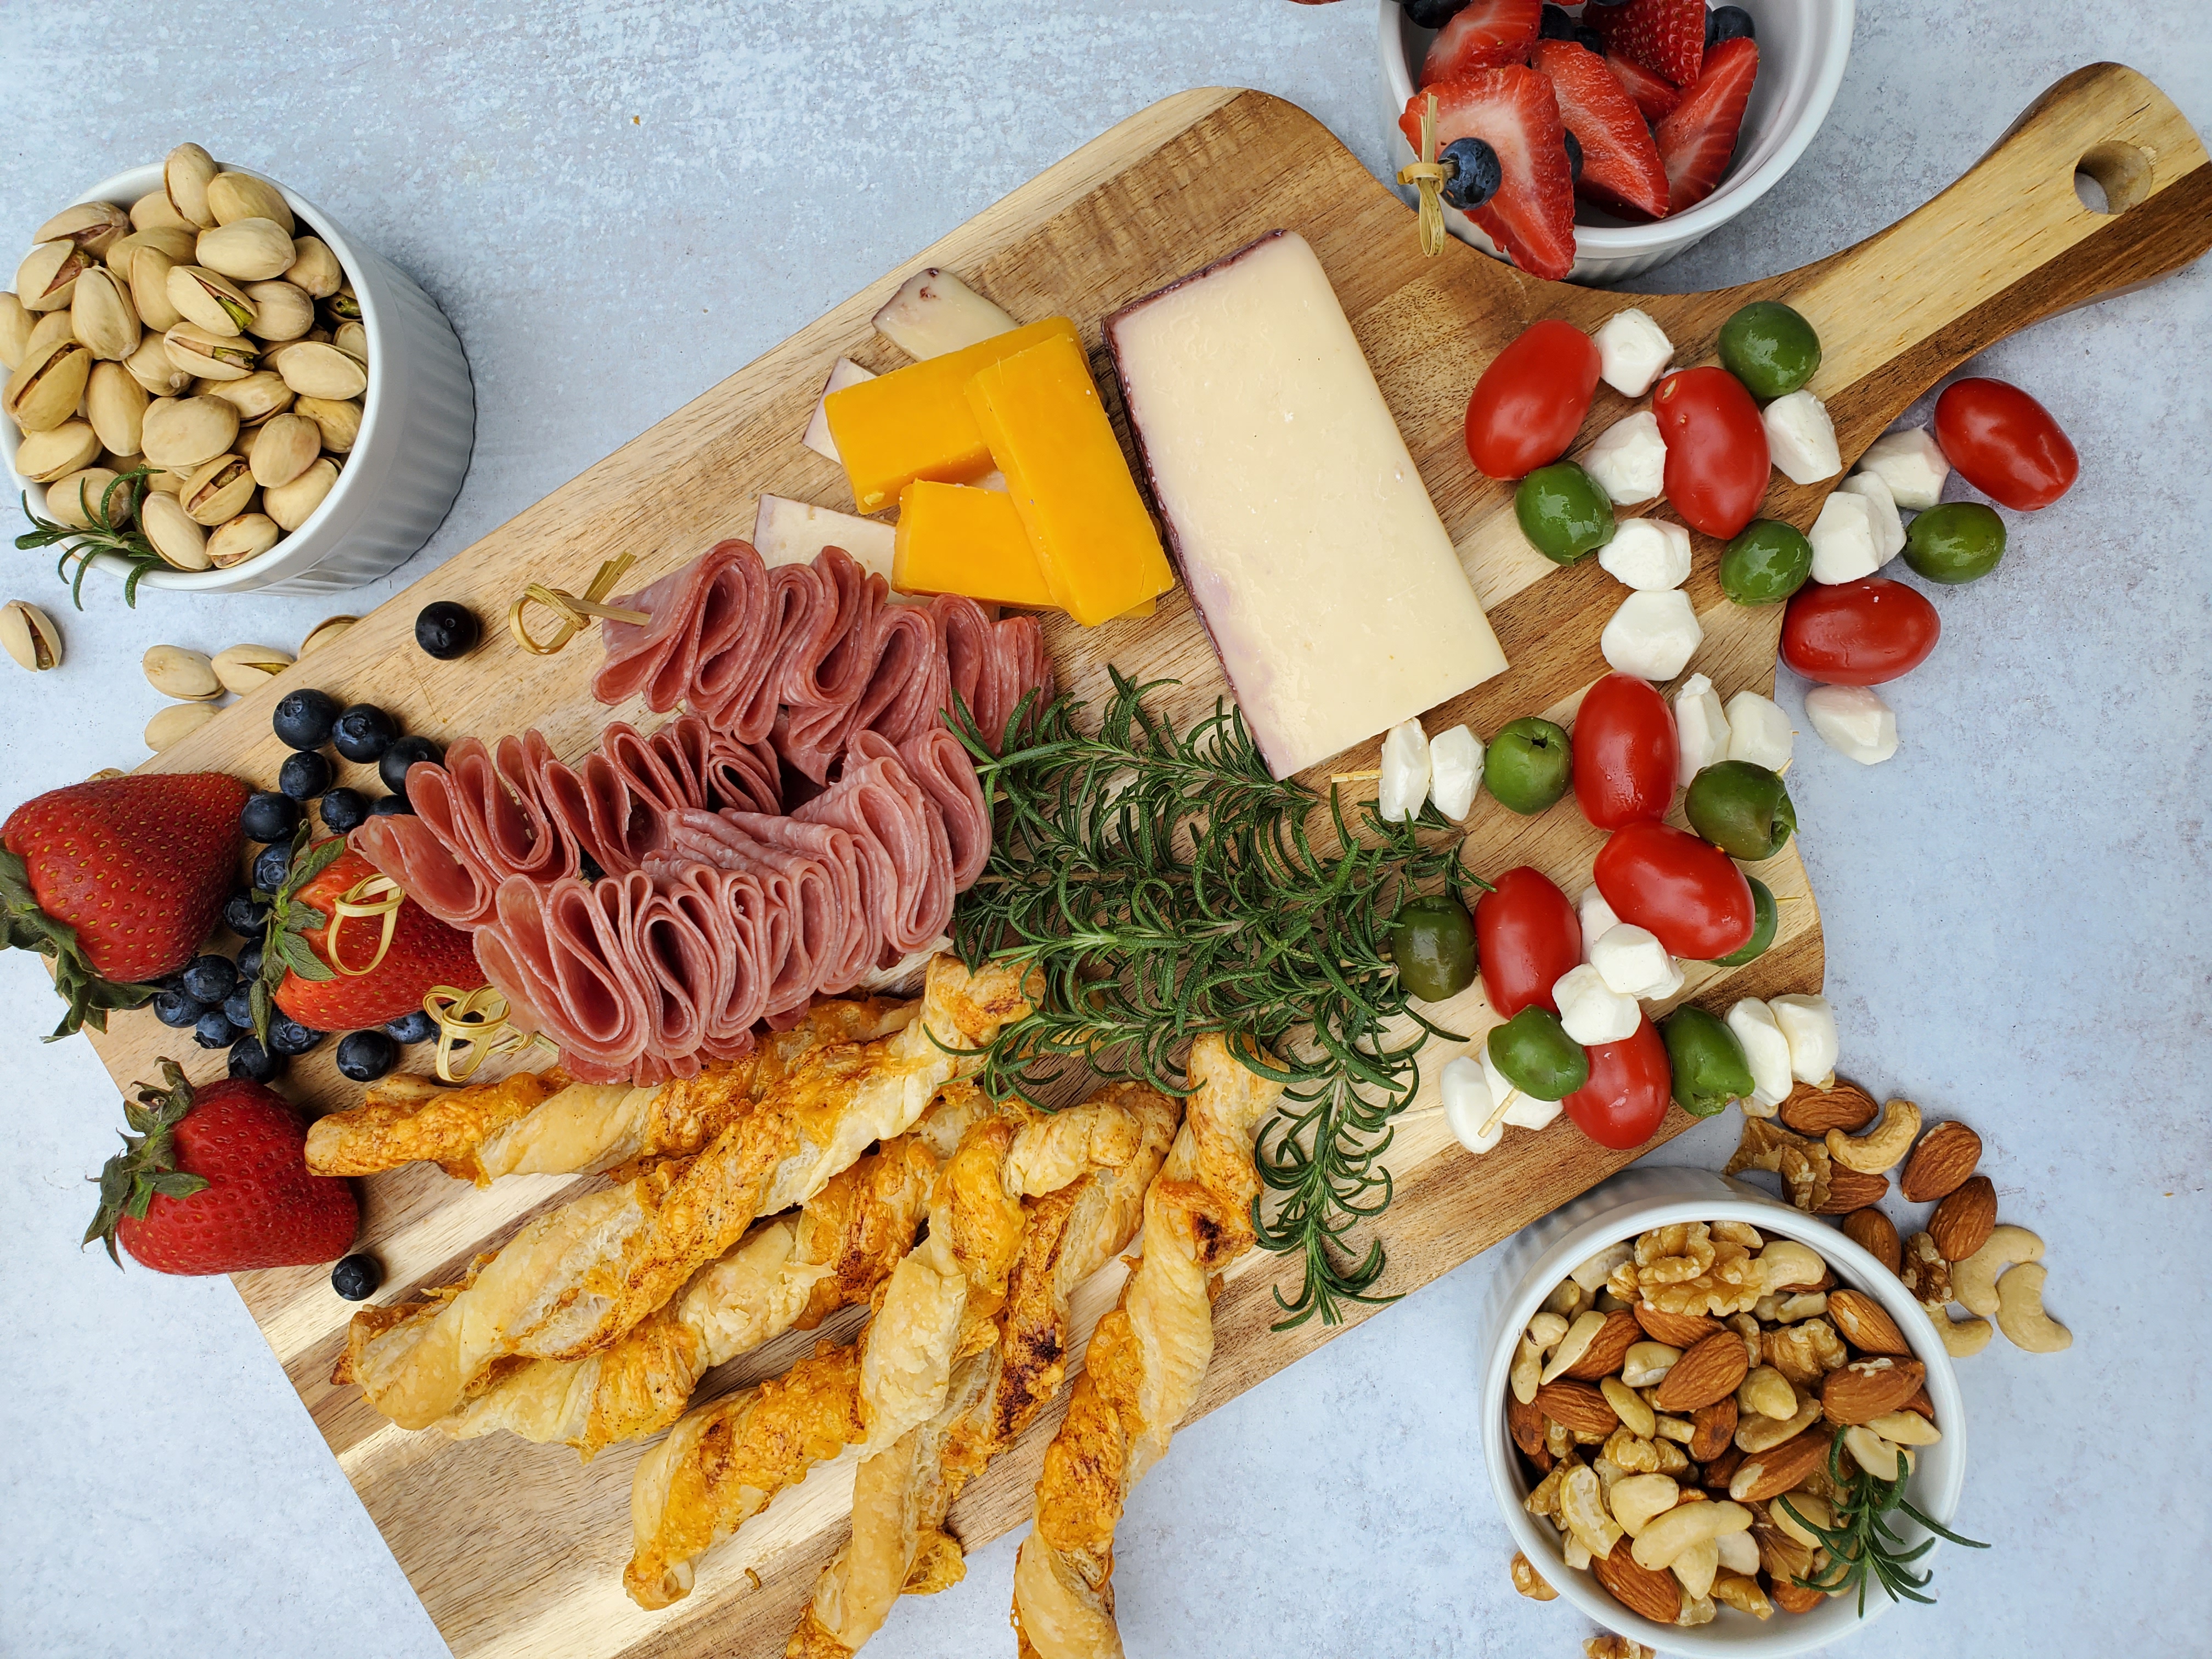 Cheeseboard with salami, mix of cheeses, and nuts